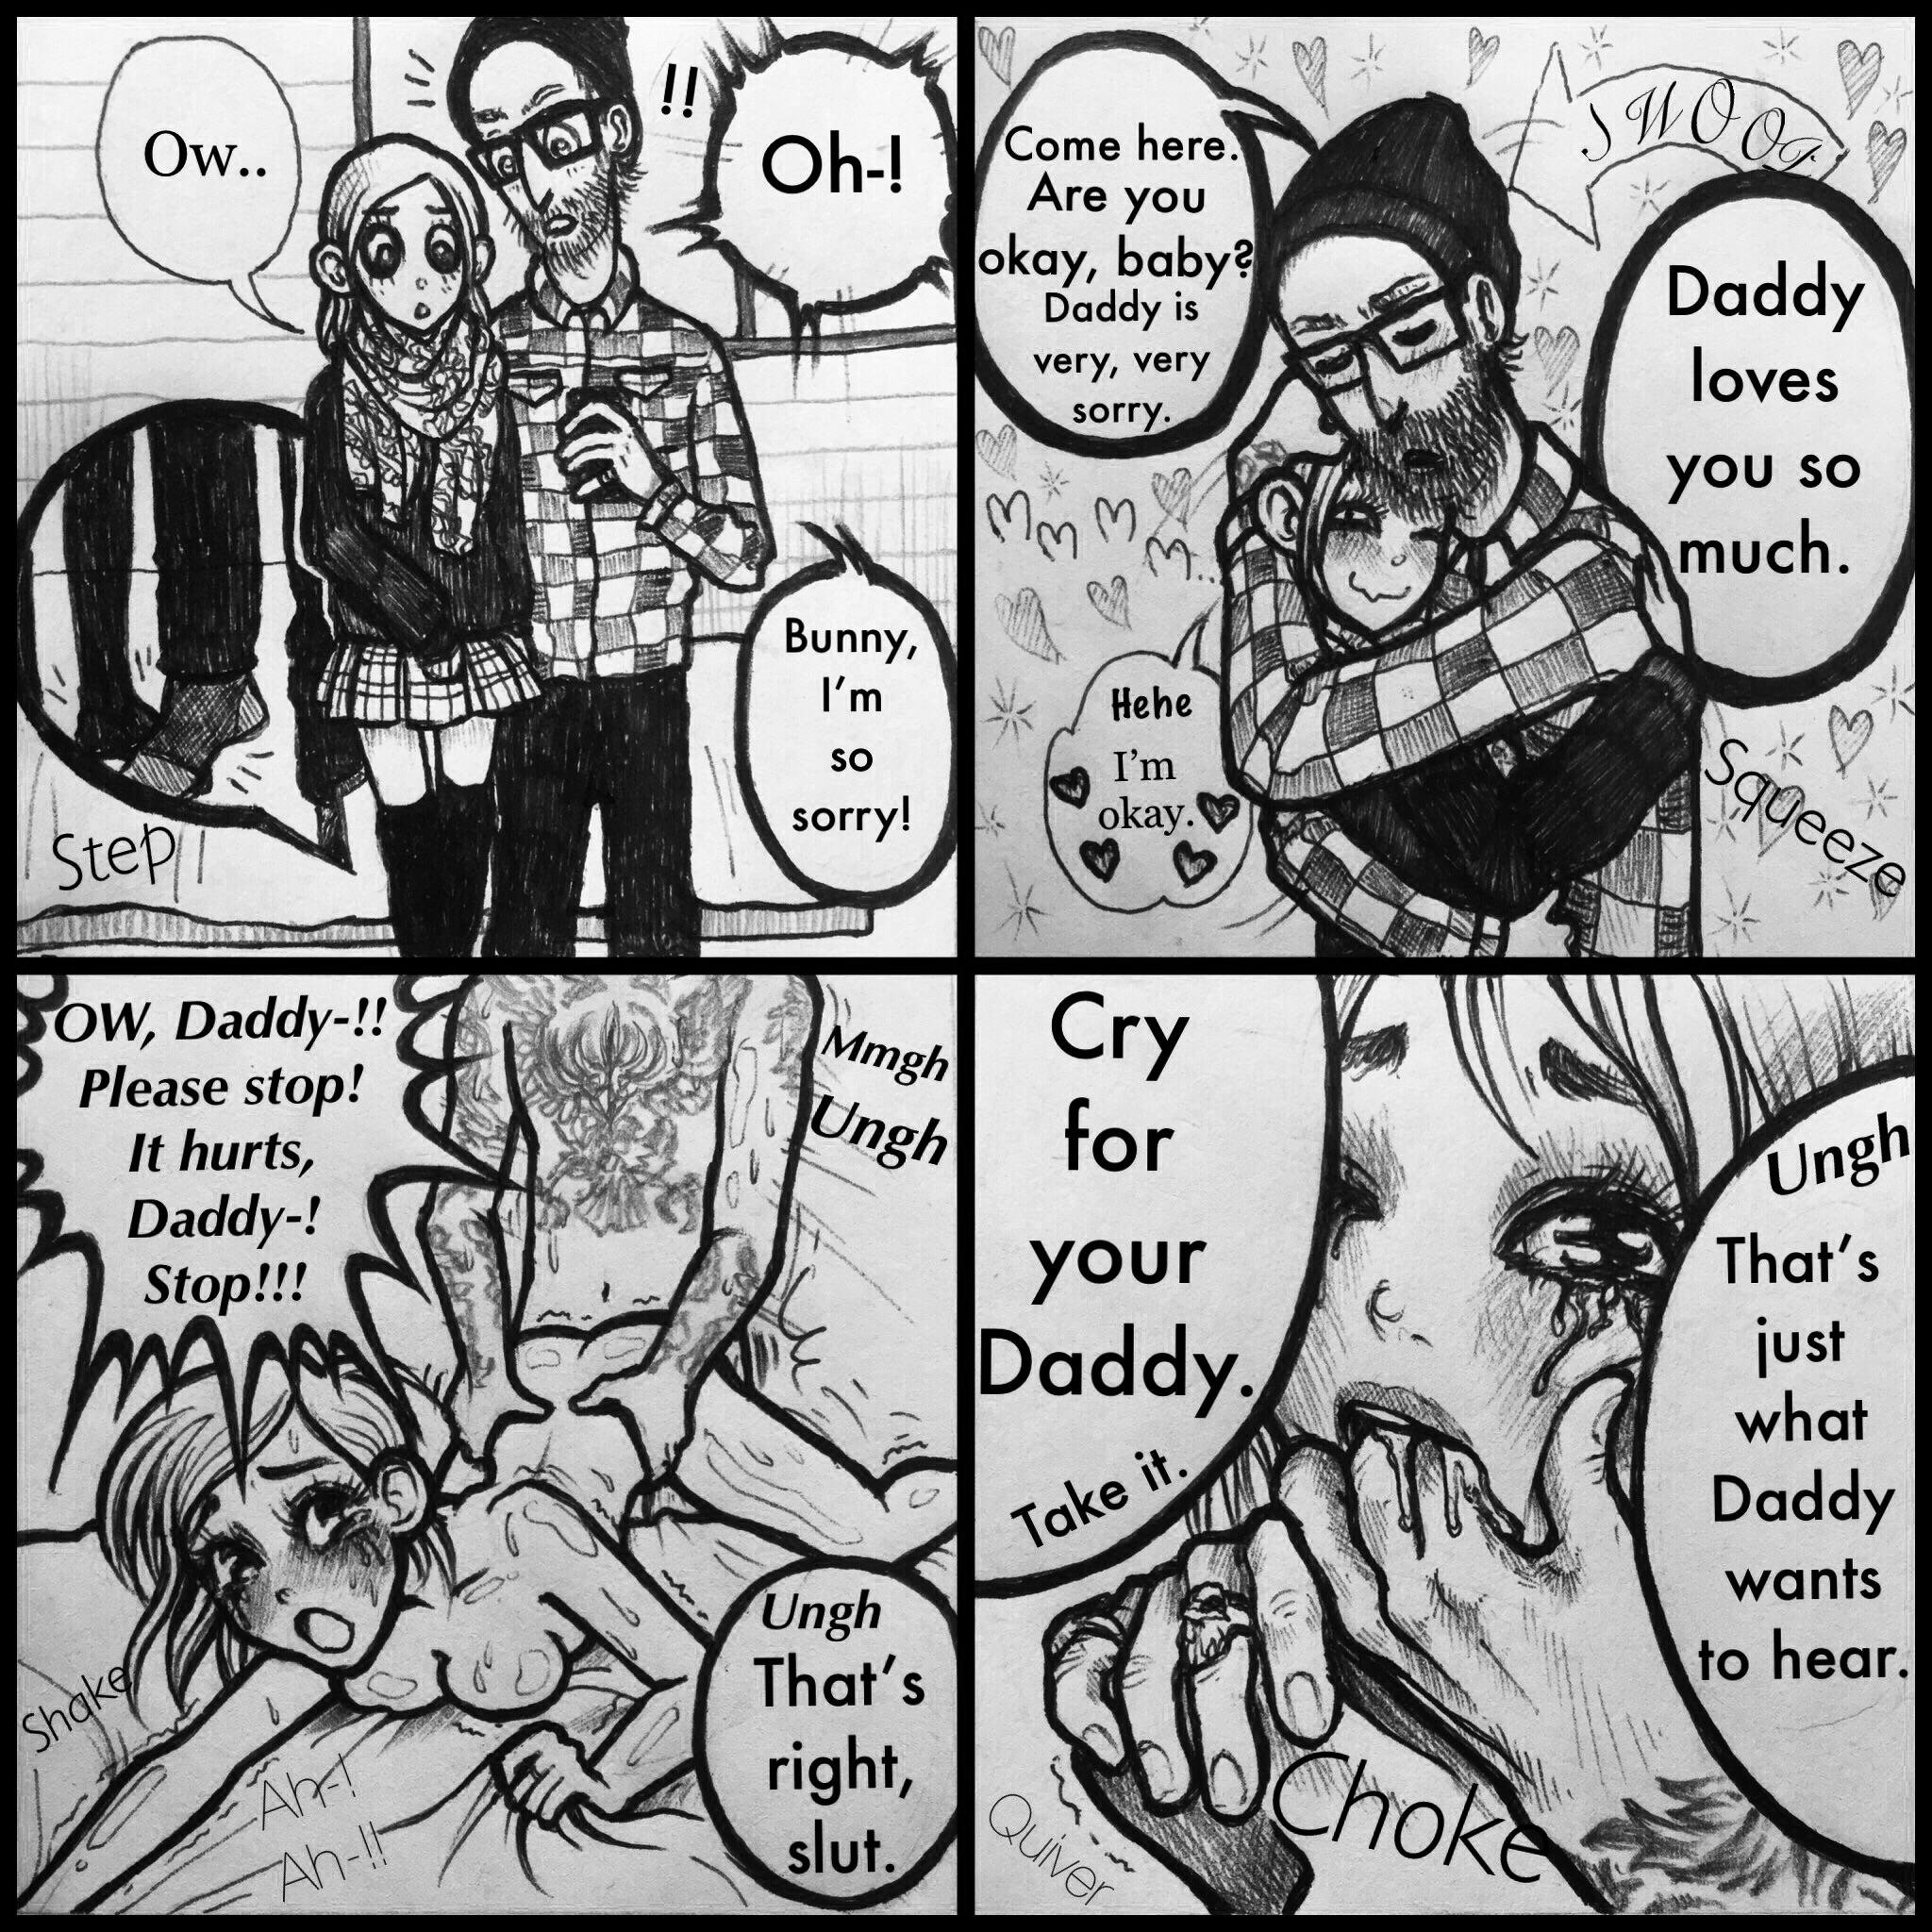 Hello! I make DDLG comics :) specifically, they are about me and my own Daddy, and things that happen in real life between us. I have an Instagram, but i thought i wcould our share here too :) hope you guys enjoy! This one is about “daddy logic” hehe